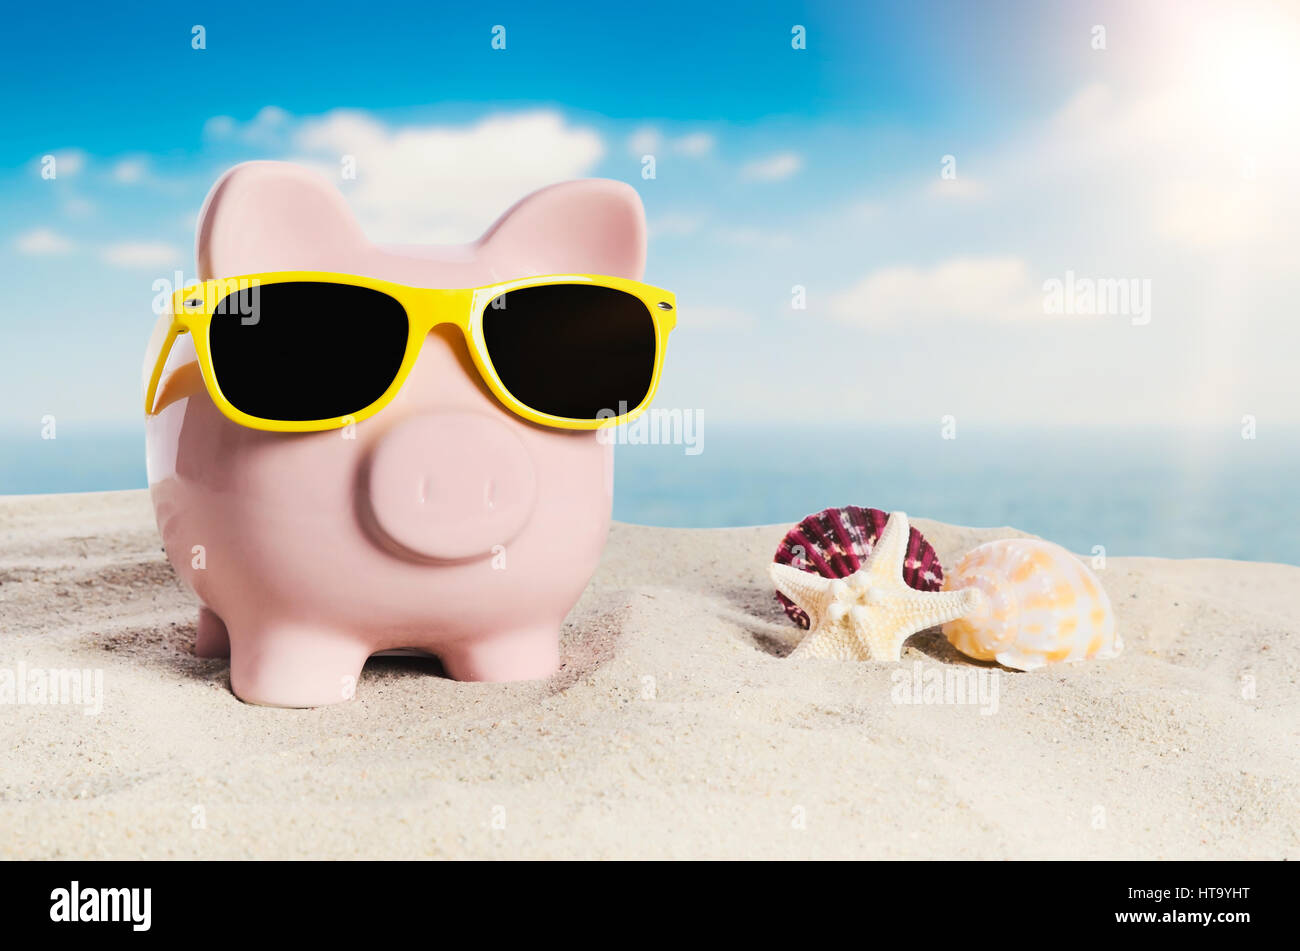 Piggy bank with sunglasses on vacation. Concept of holidays economy Stock Photo